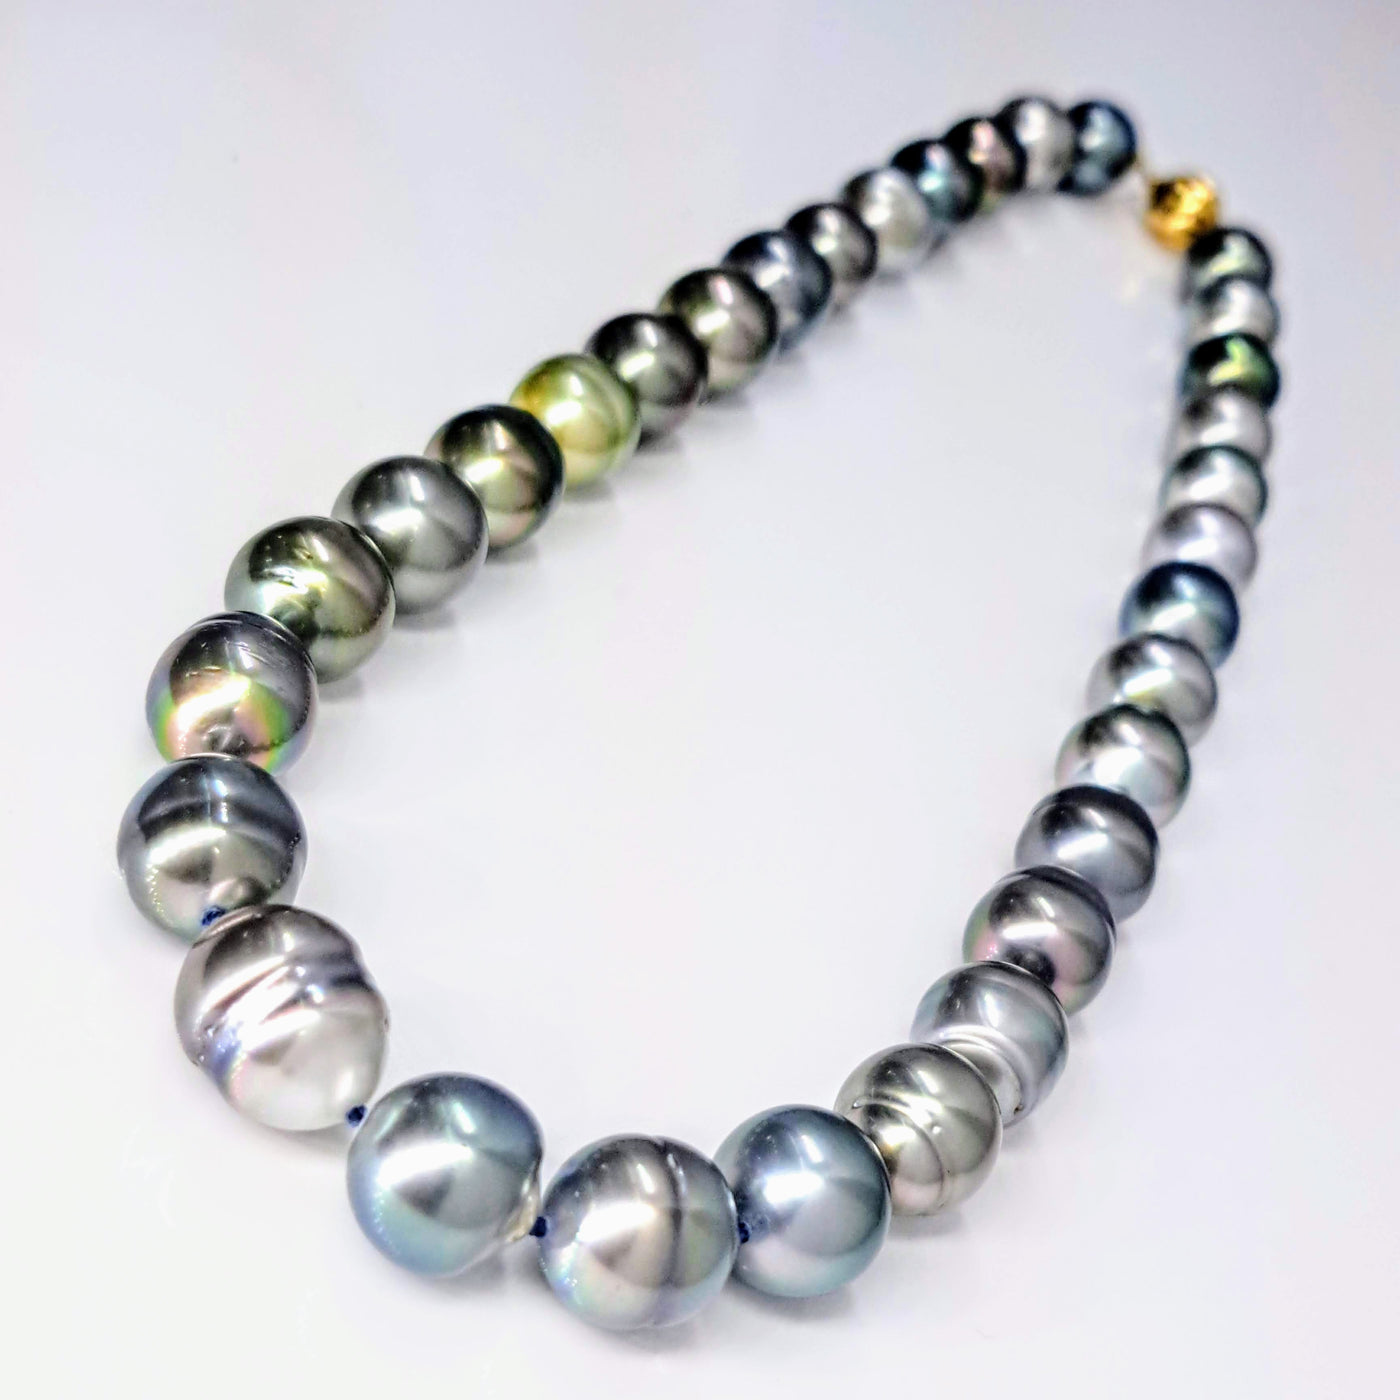 "Silver Fox" 16" Necklace- Tahitian Pearls, 18K Gold Ball Safety Clasp